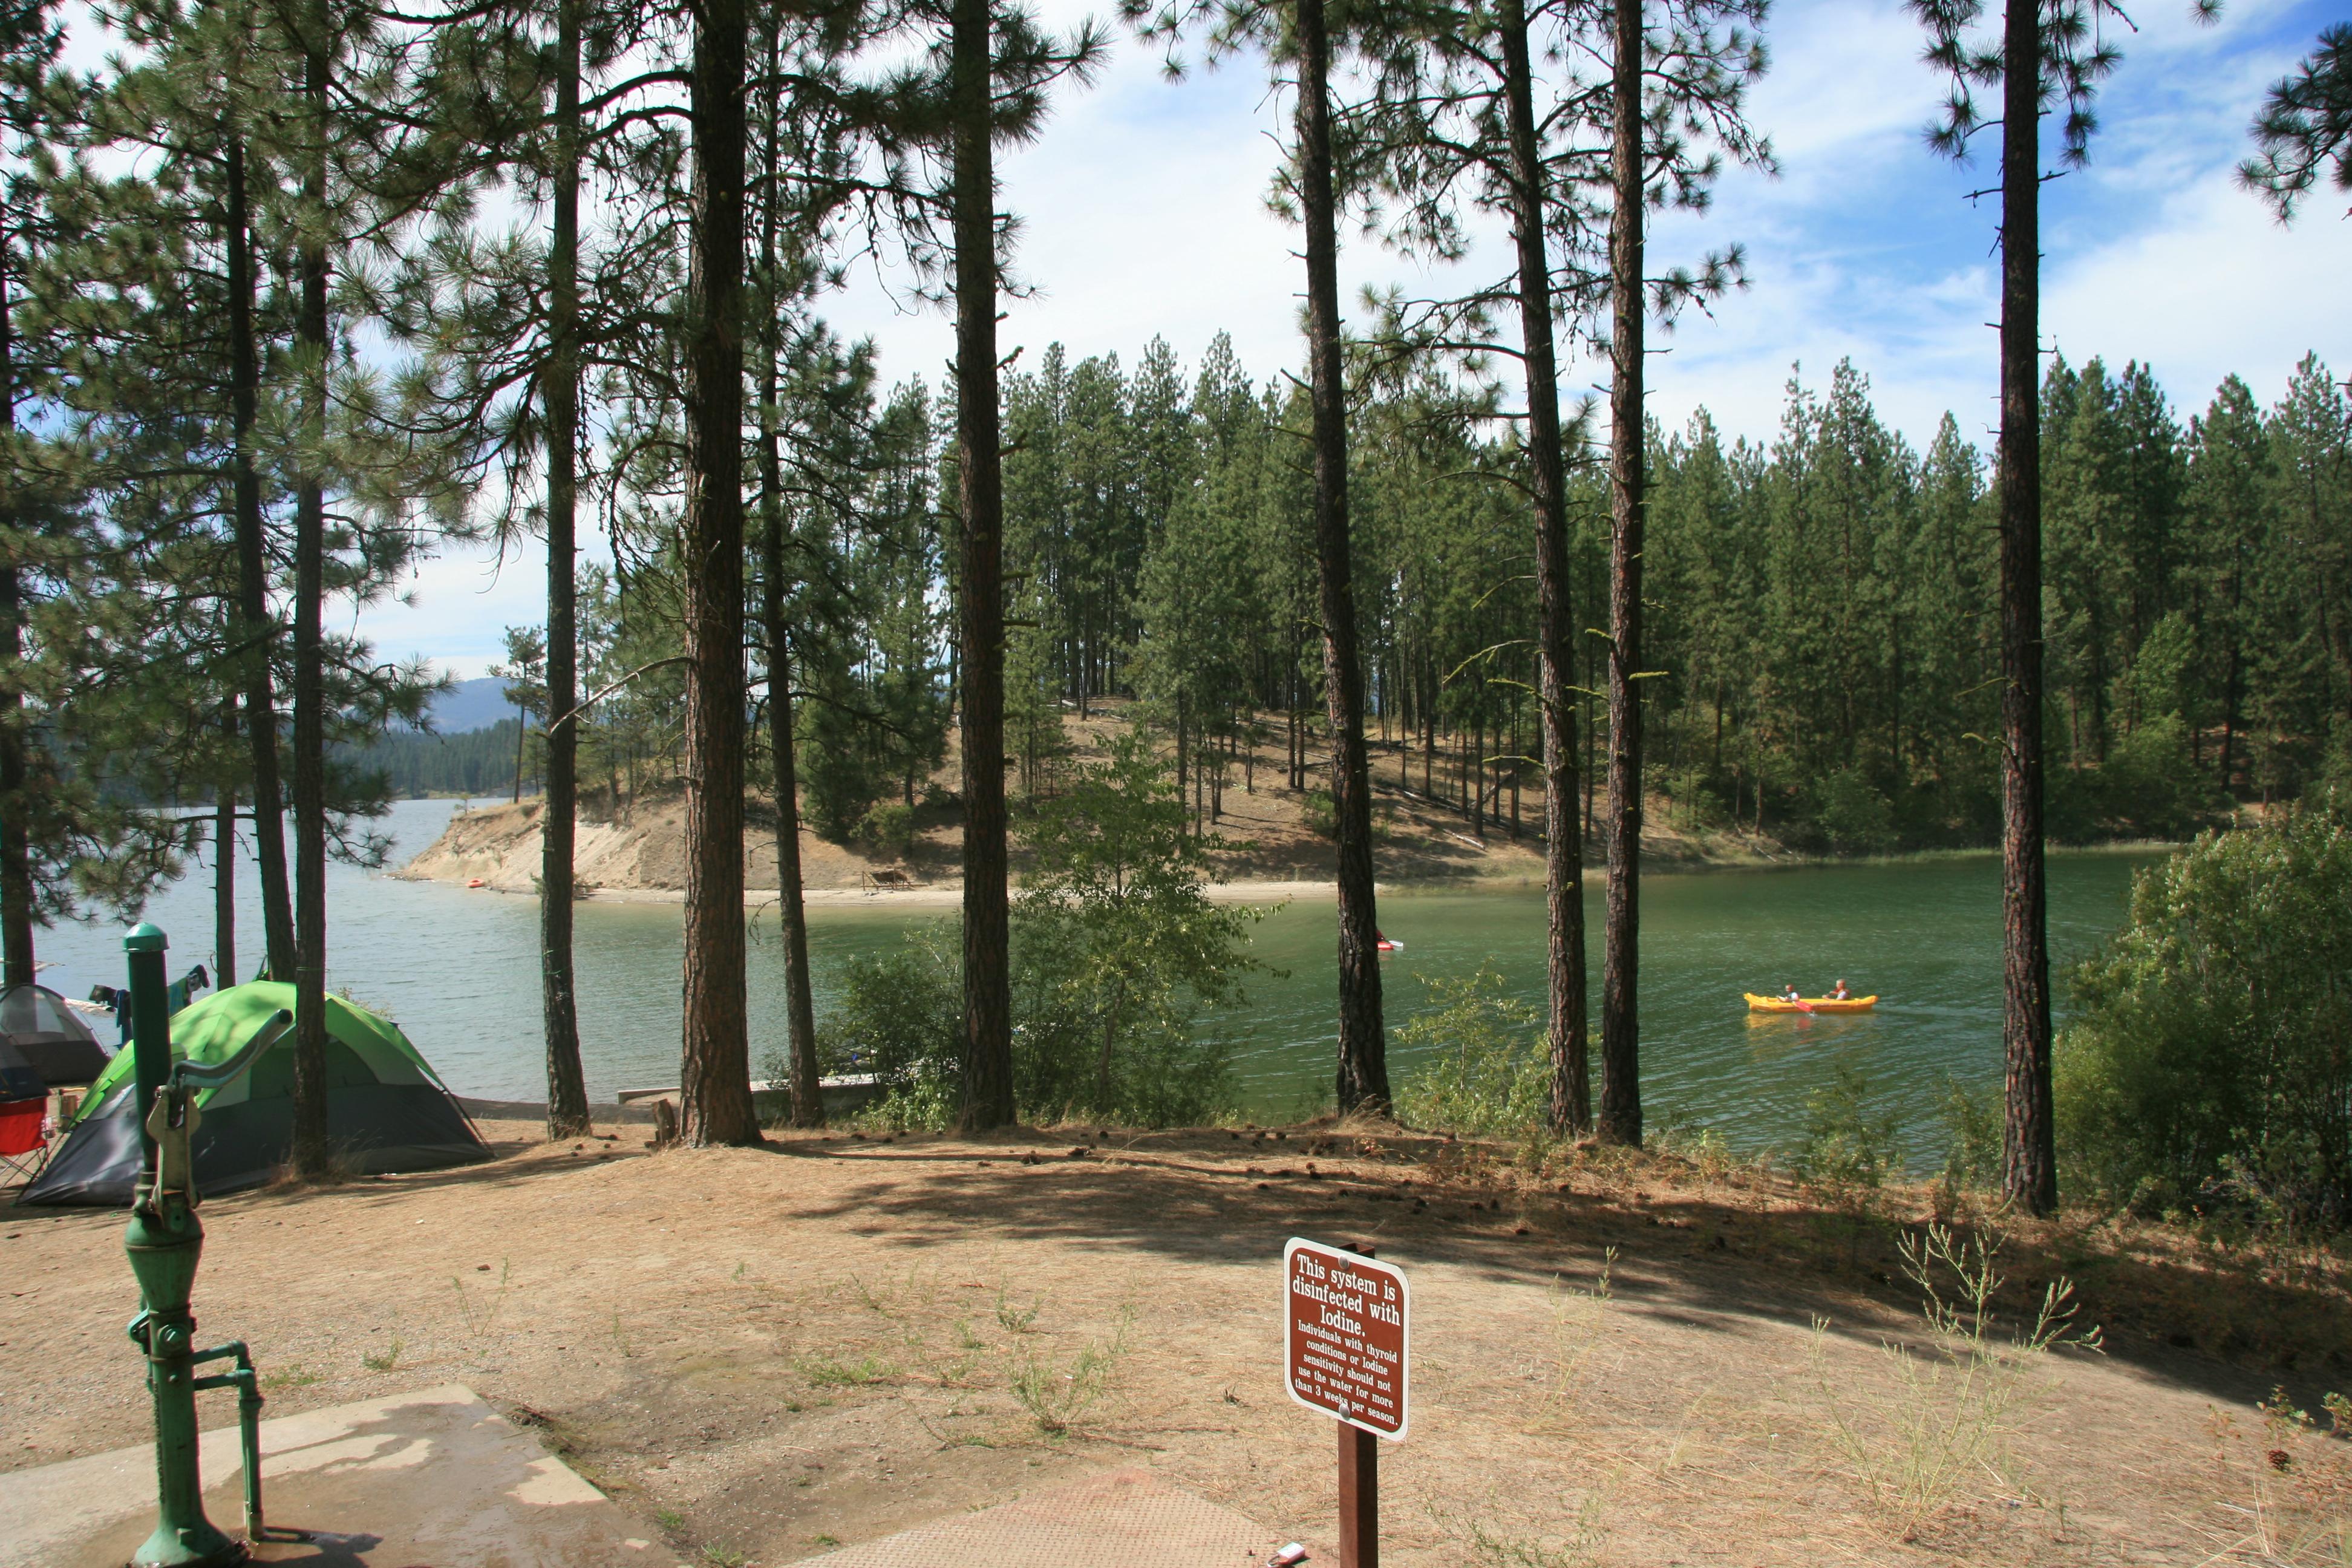 A tent campsite in the pines adjacent to the lake. A canoe moves past beyond.